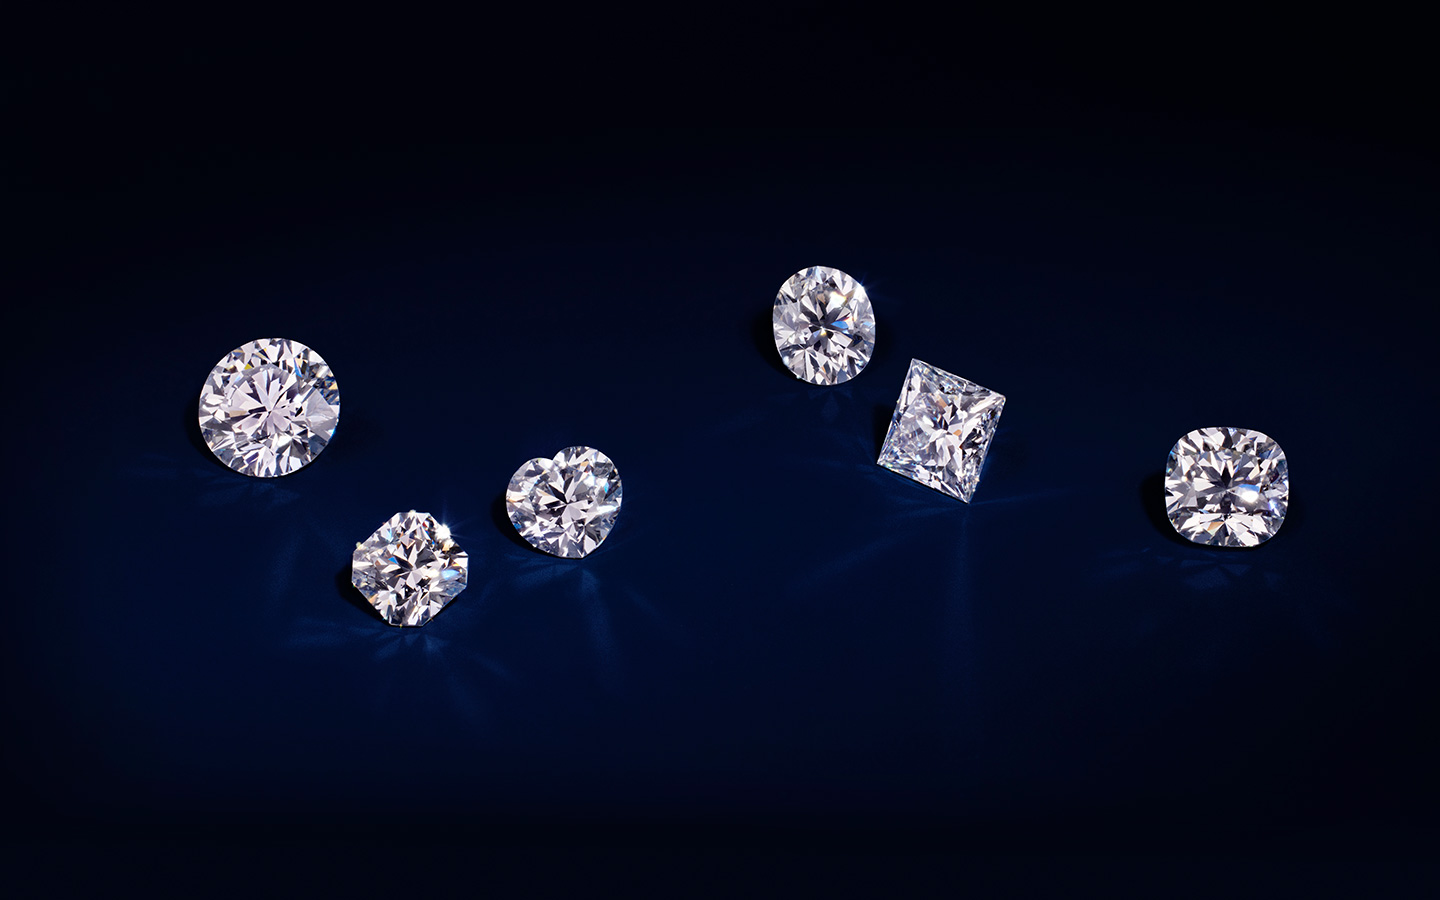 Loose diamonds in various shapes including round, princess, heart and Asscher.